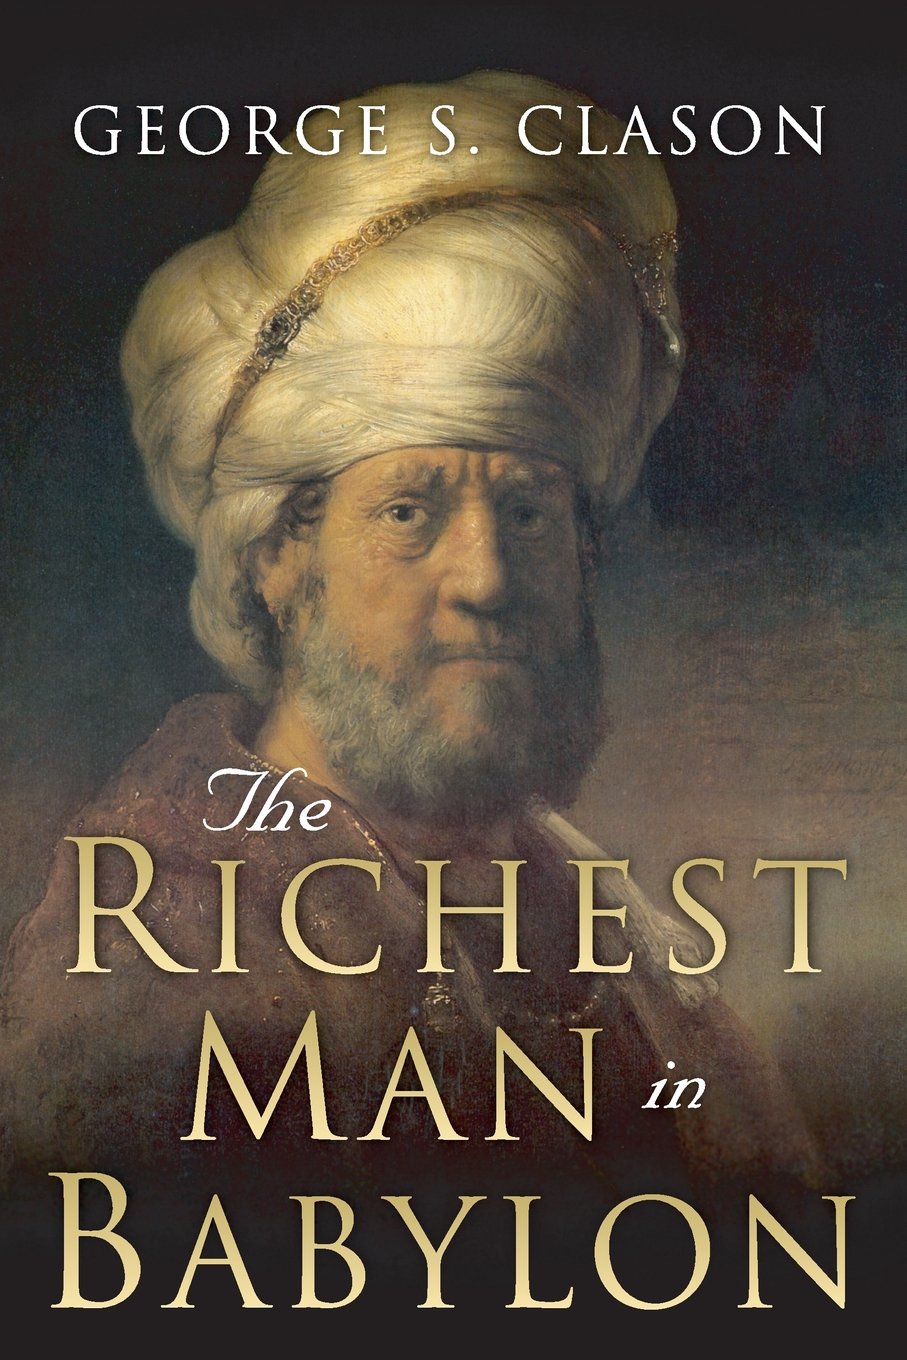 The Richest Man in Babylon, by George S. Clason, 